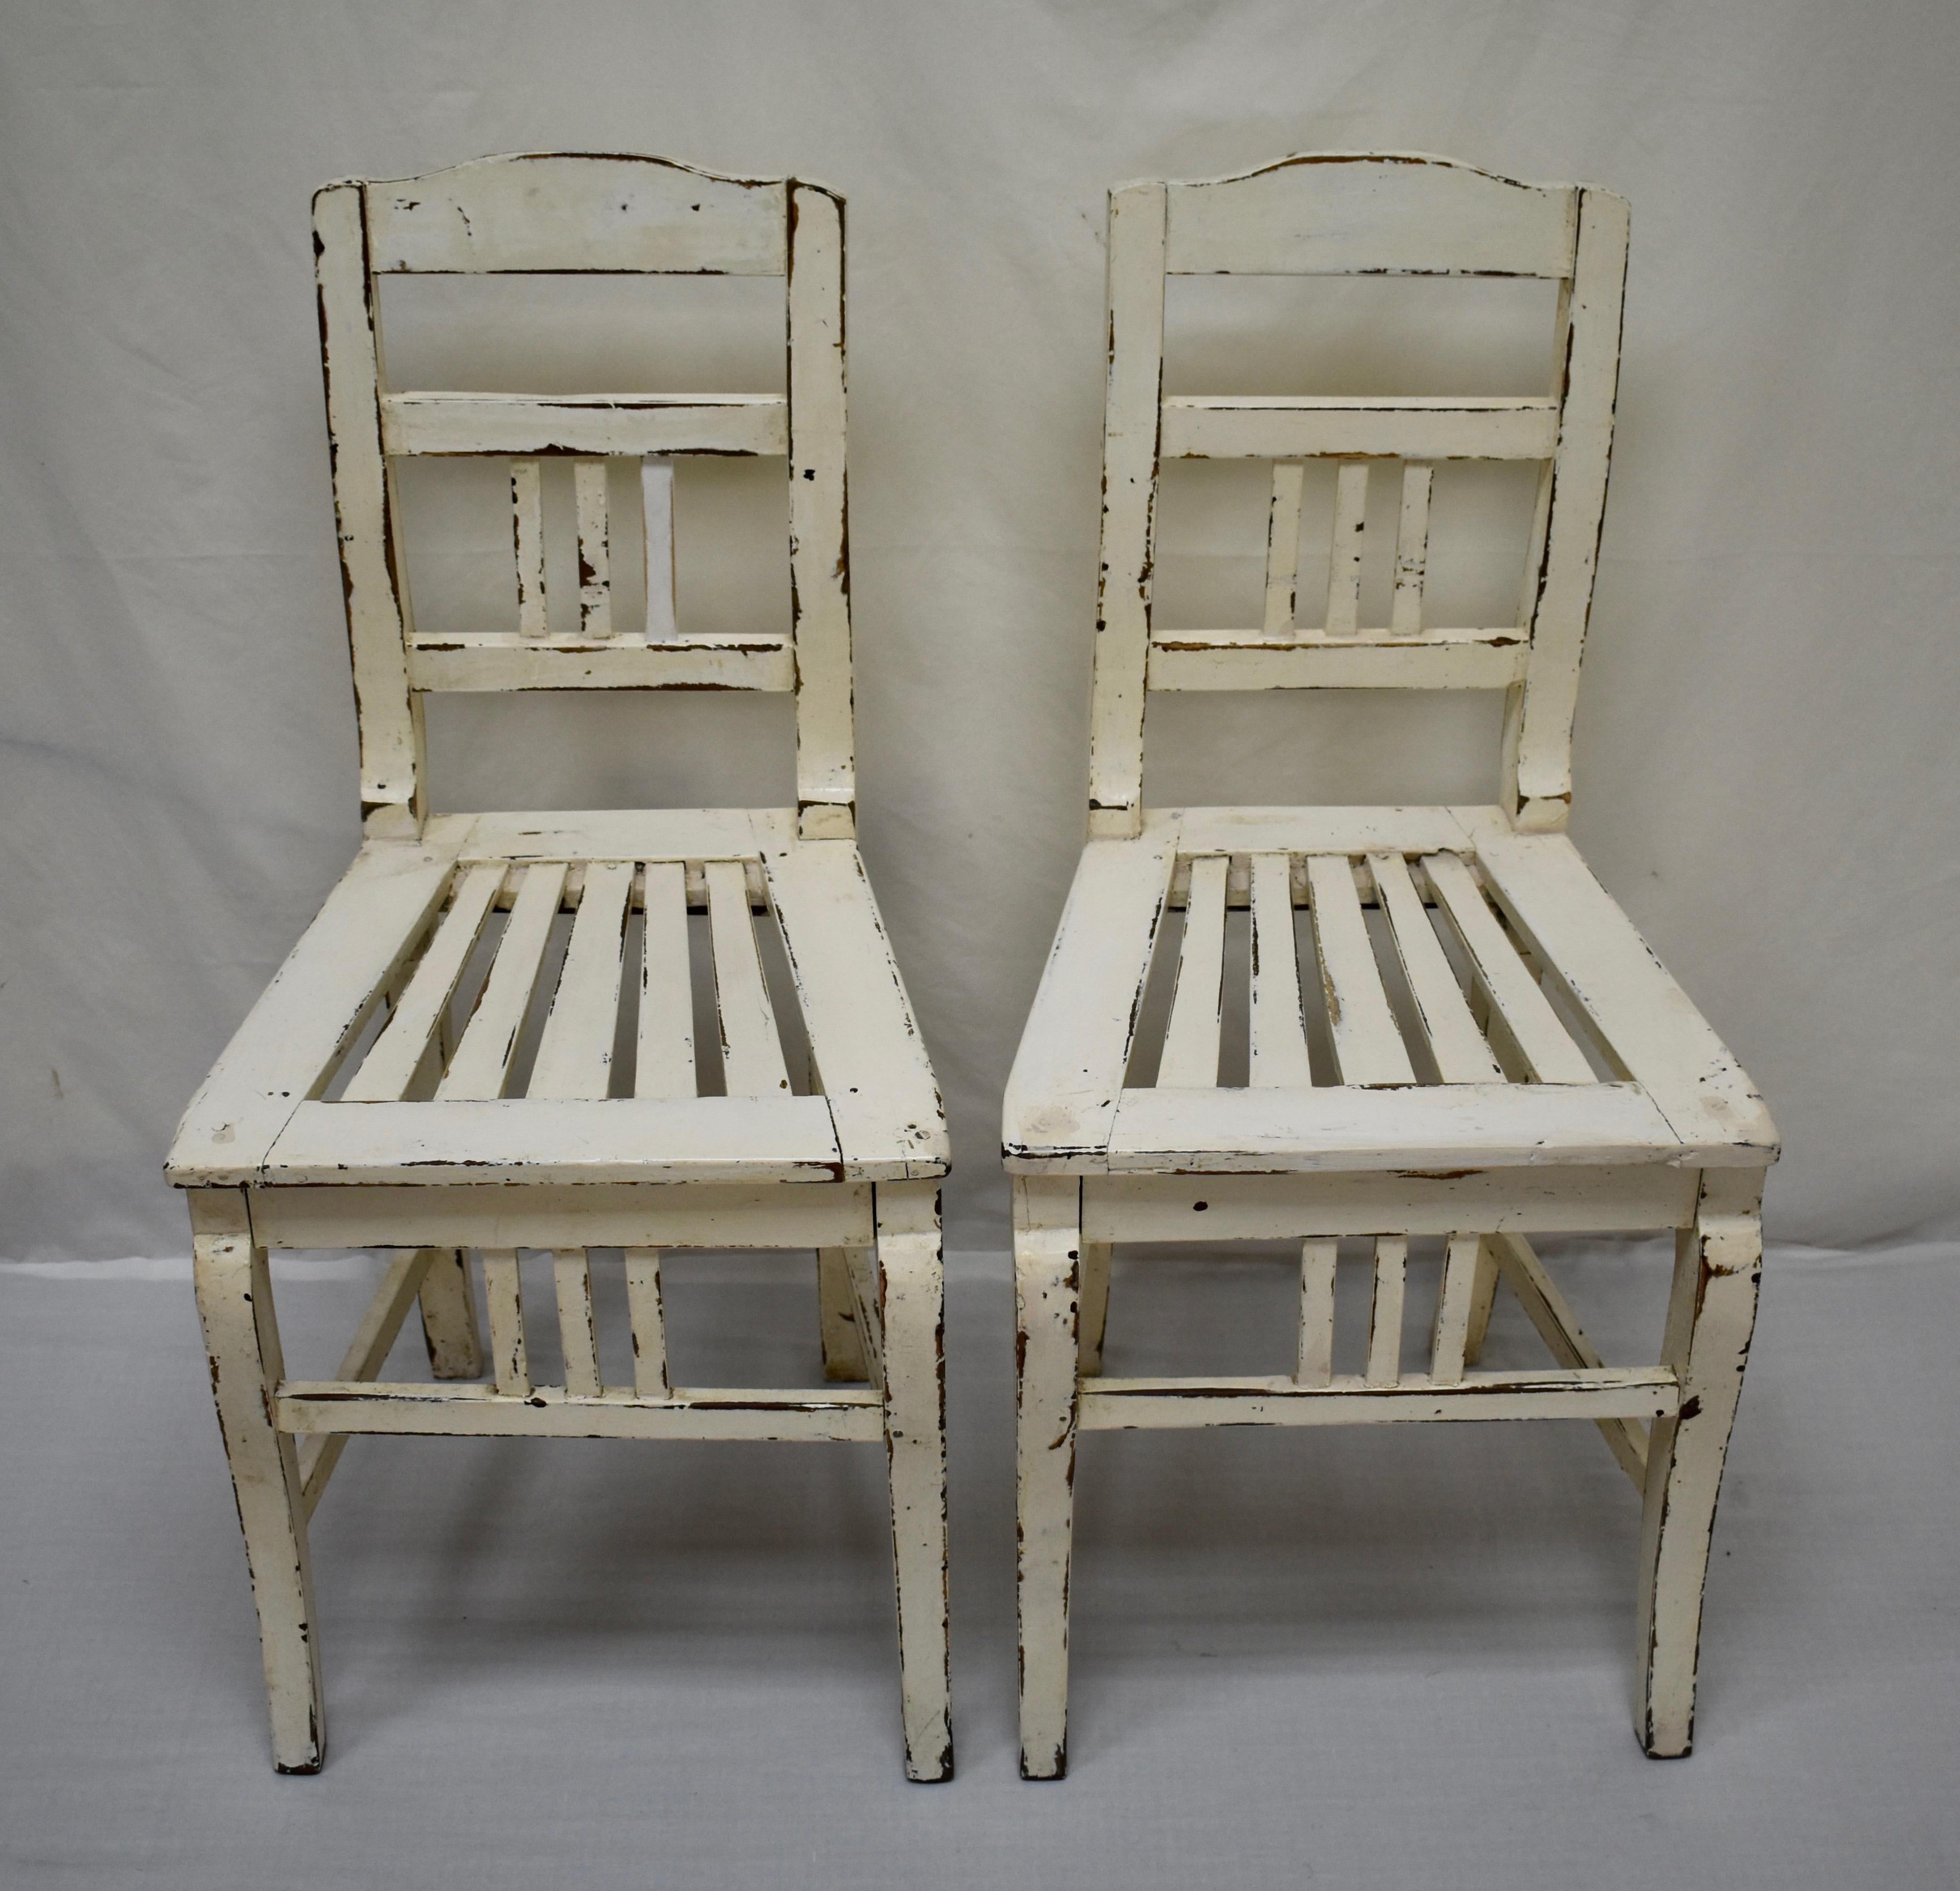 These are an interesting variant on a common style of central European side chair. The back rail has a slightly curved top and the two straight rails beneath frame three vertical slats. The shape of the Queen Anne style front legs, also with a